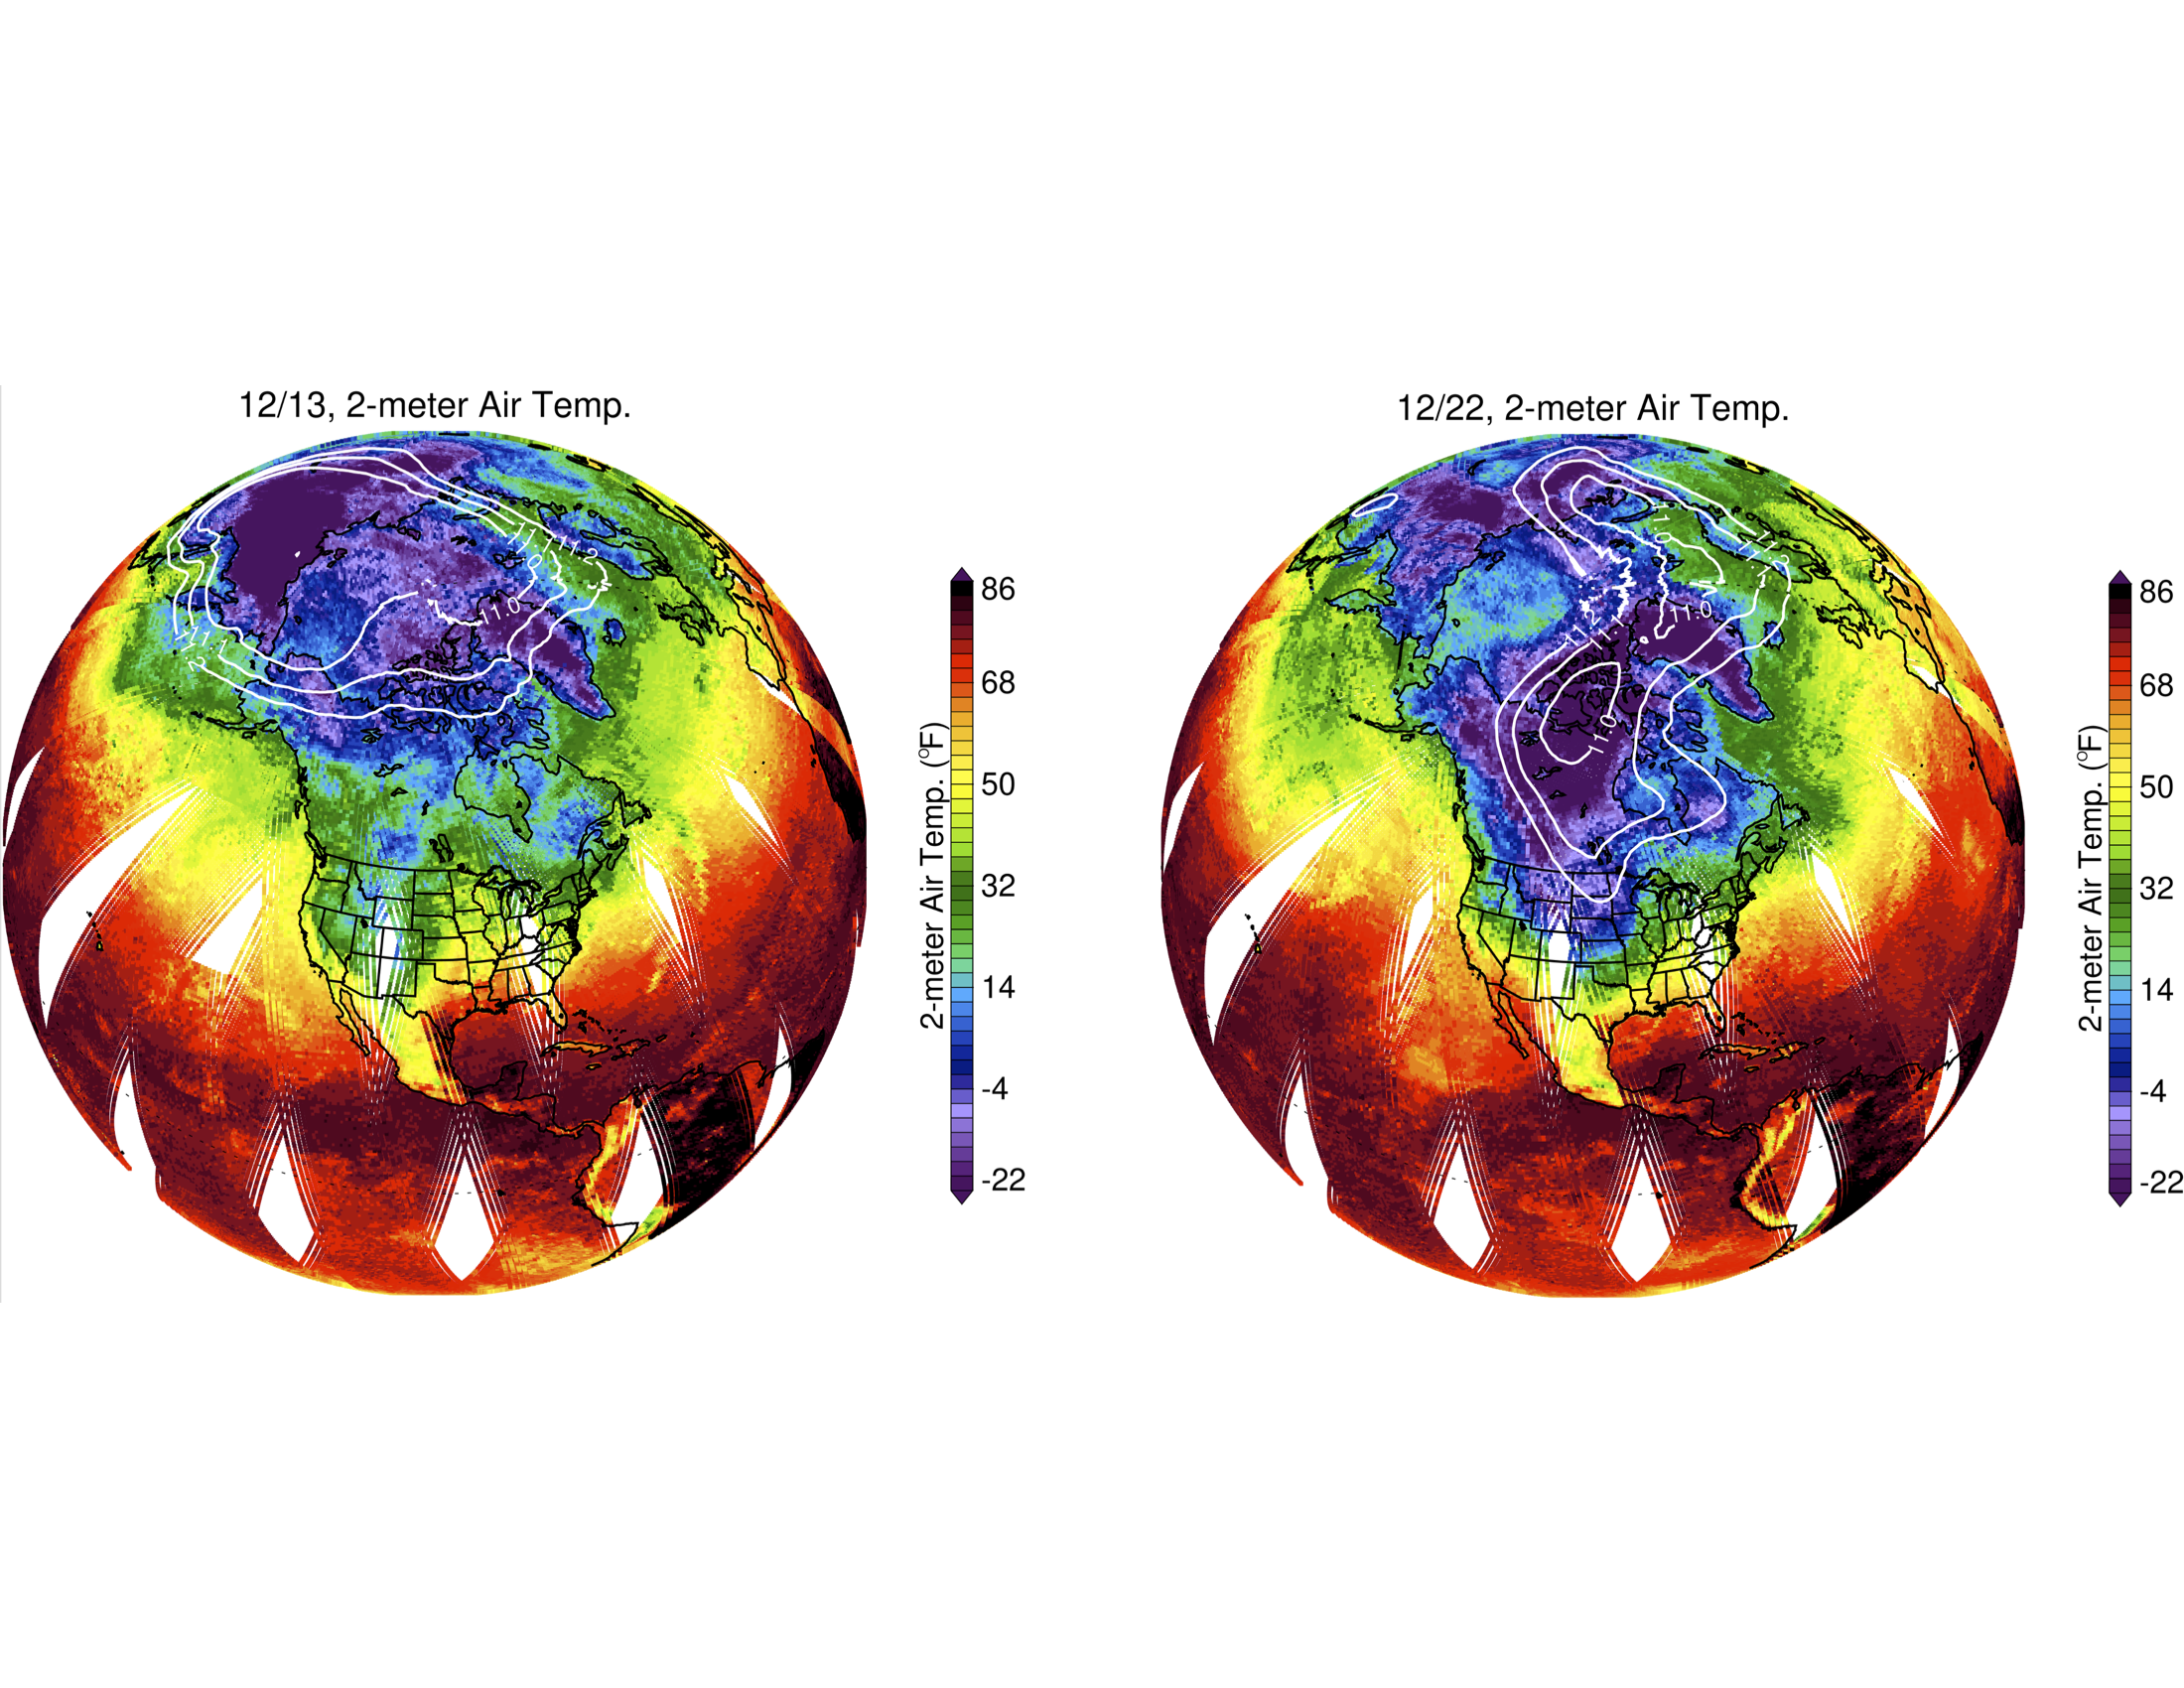 slide 5 - surface air temperature maps with geopotential height contours overlaid over North America and the Arctic during December 13th and 22nd, 2022, showing the breaking polar vortex and extremely cold air plunging into the US.